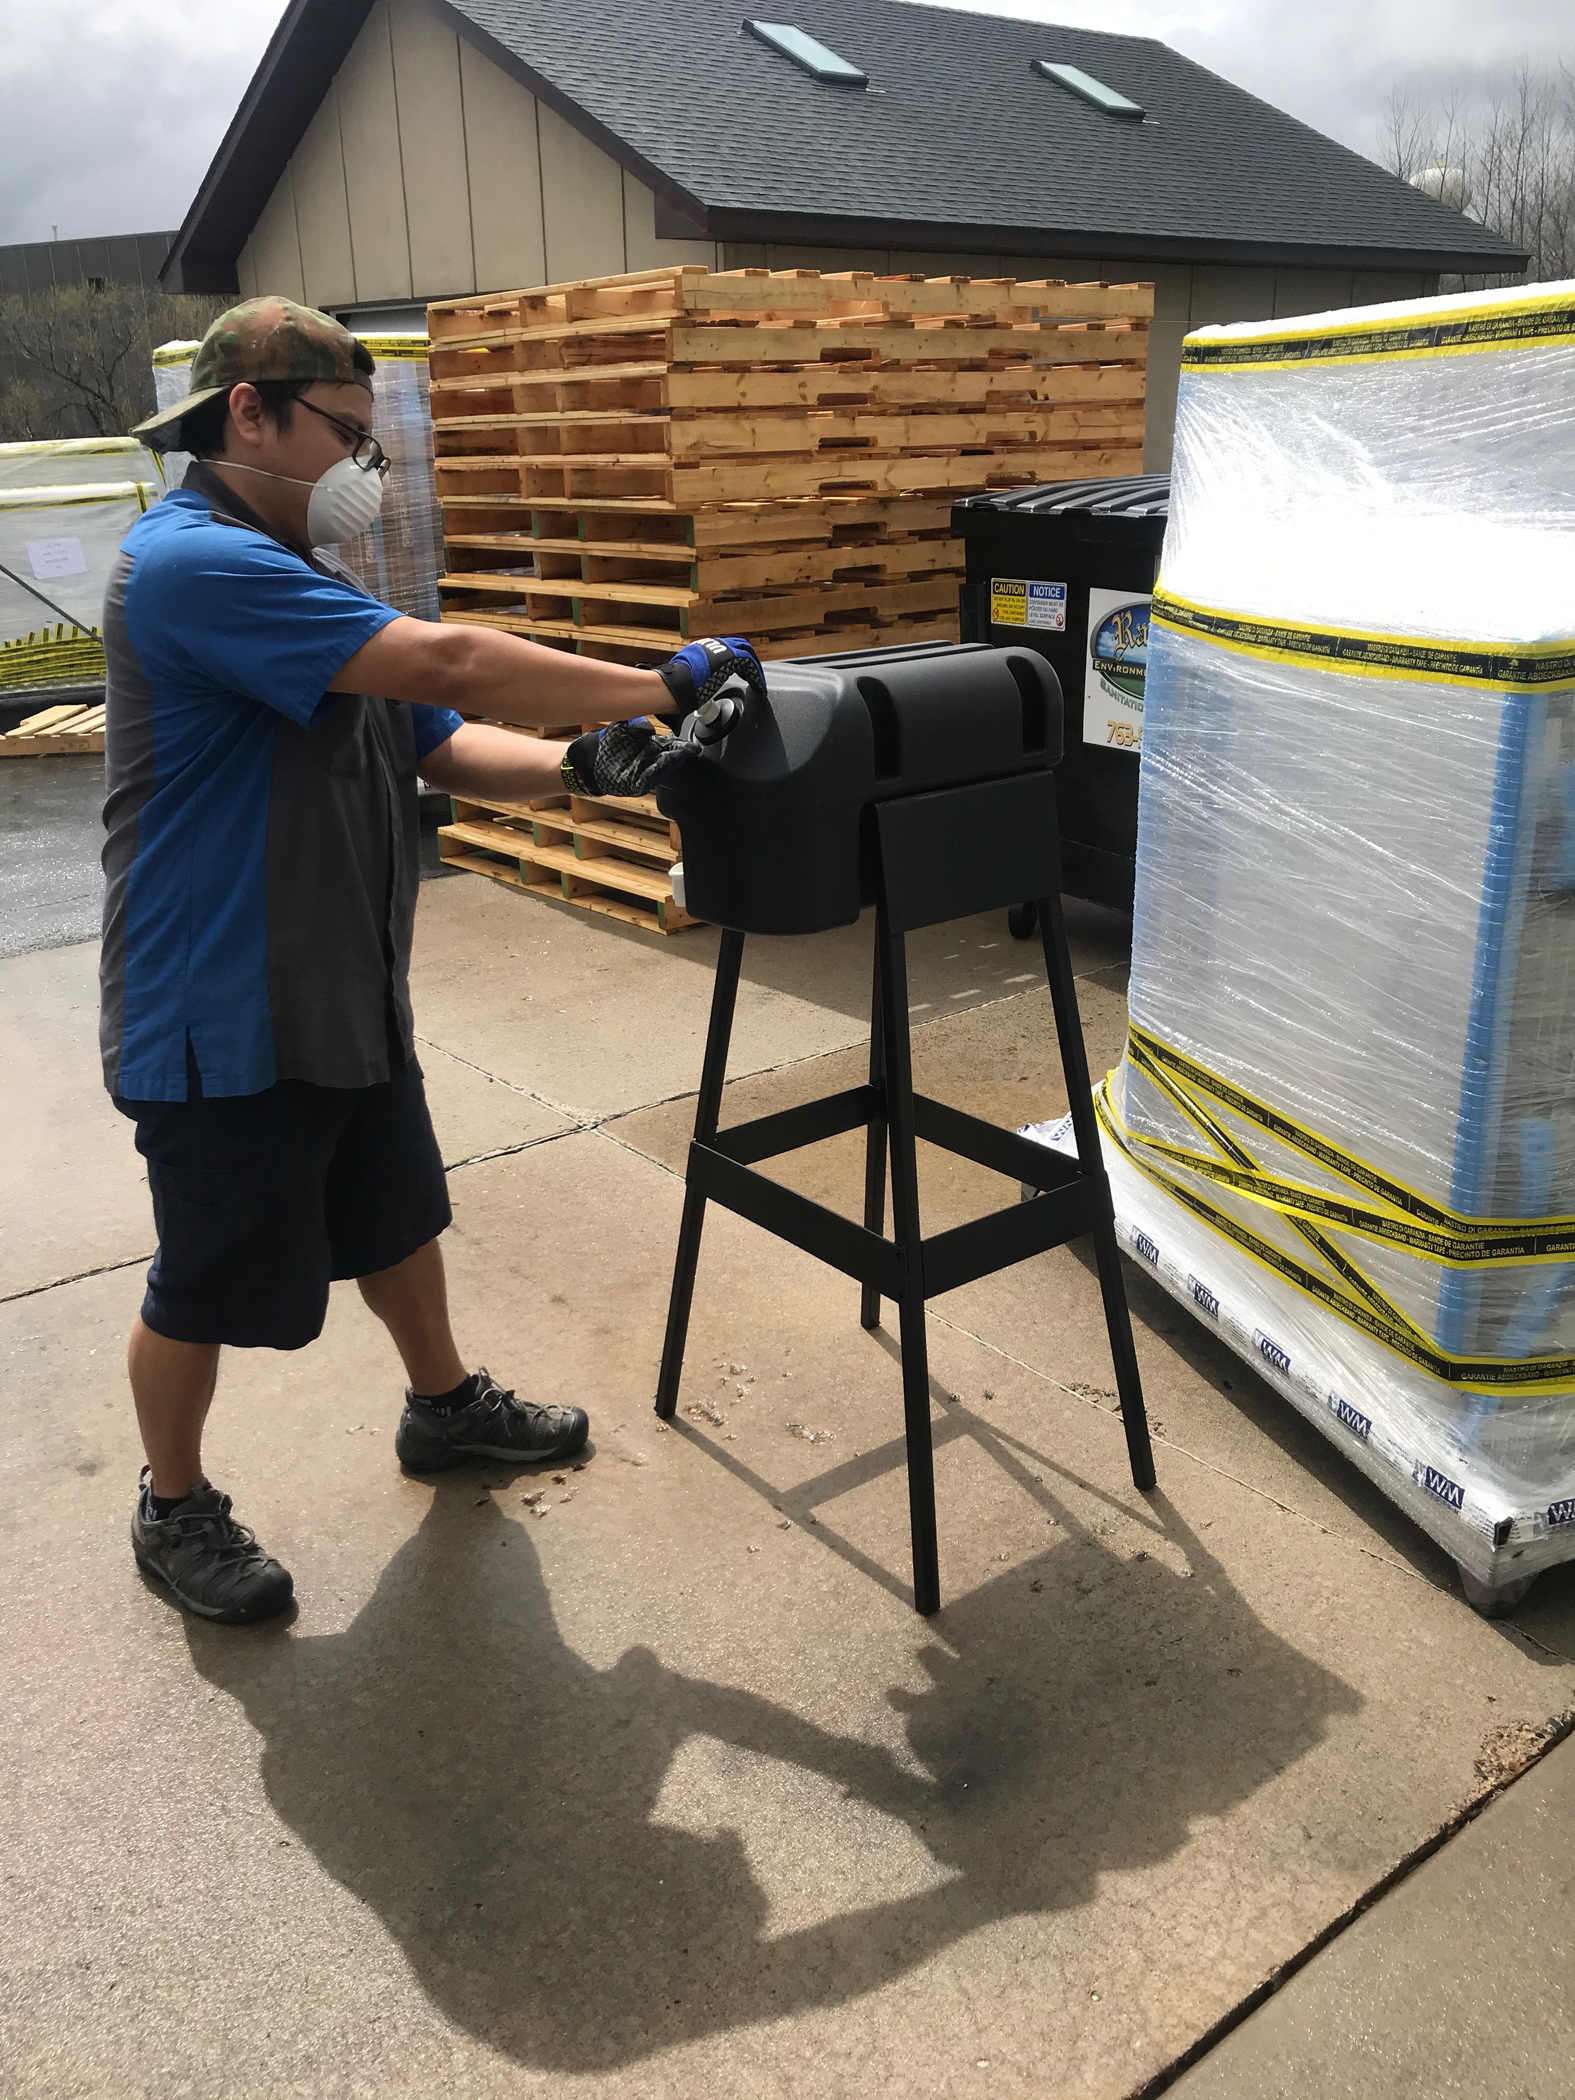 The new units meet Occupational Safety and Health Administration (OSHA) requirements for hand-washing stations at construction sites and can easily be positioned and repositioned as the need arises.